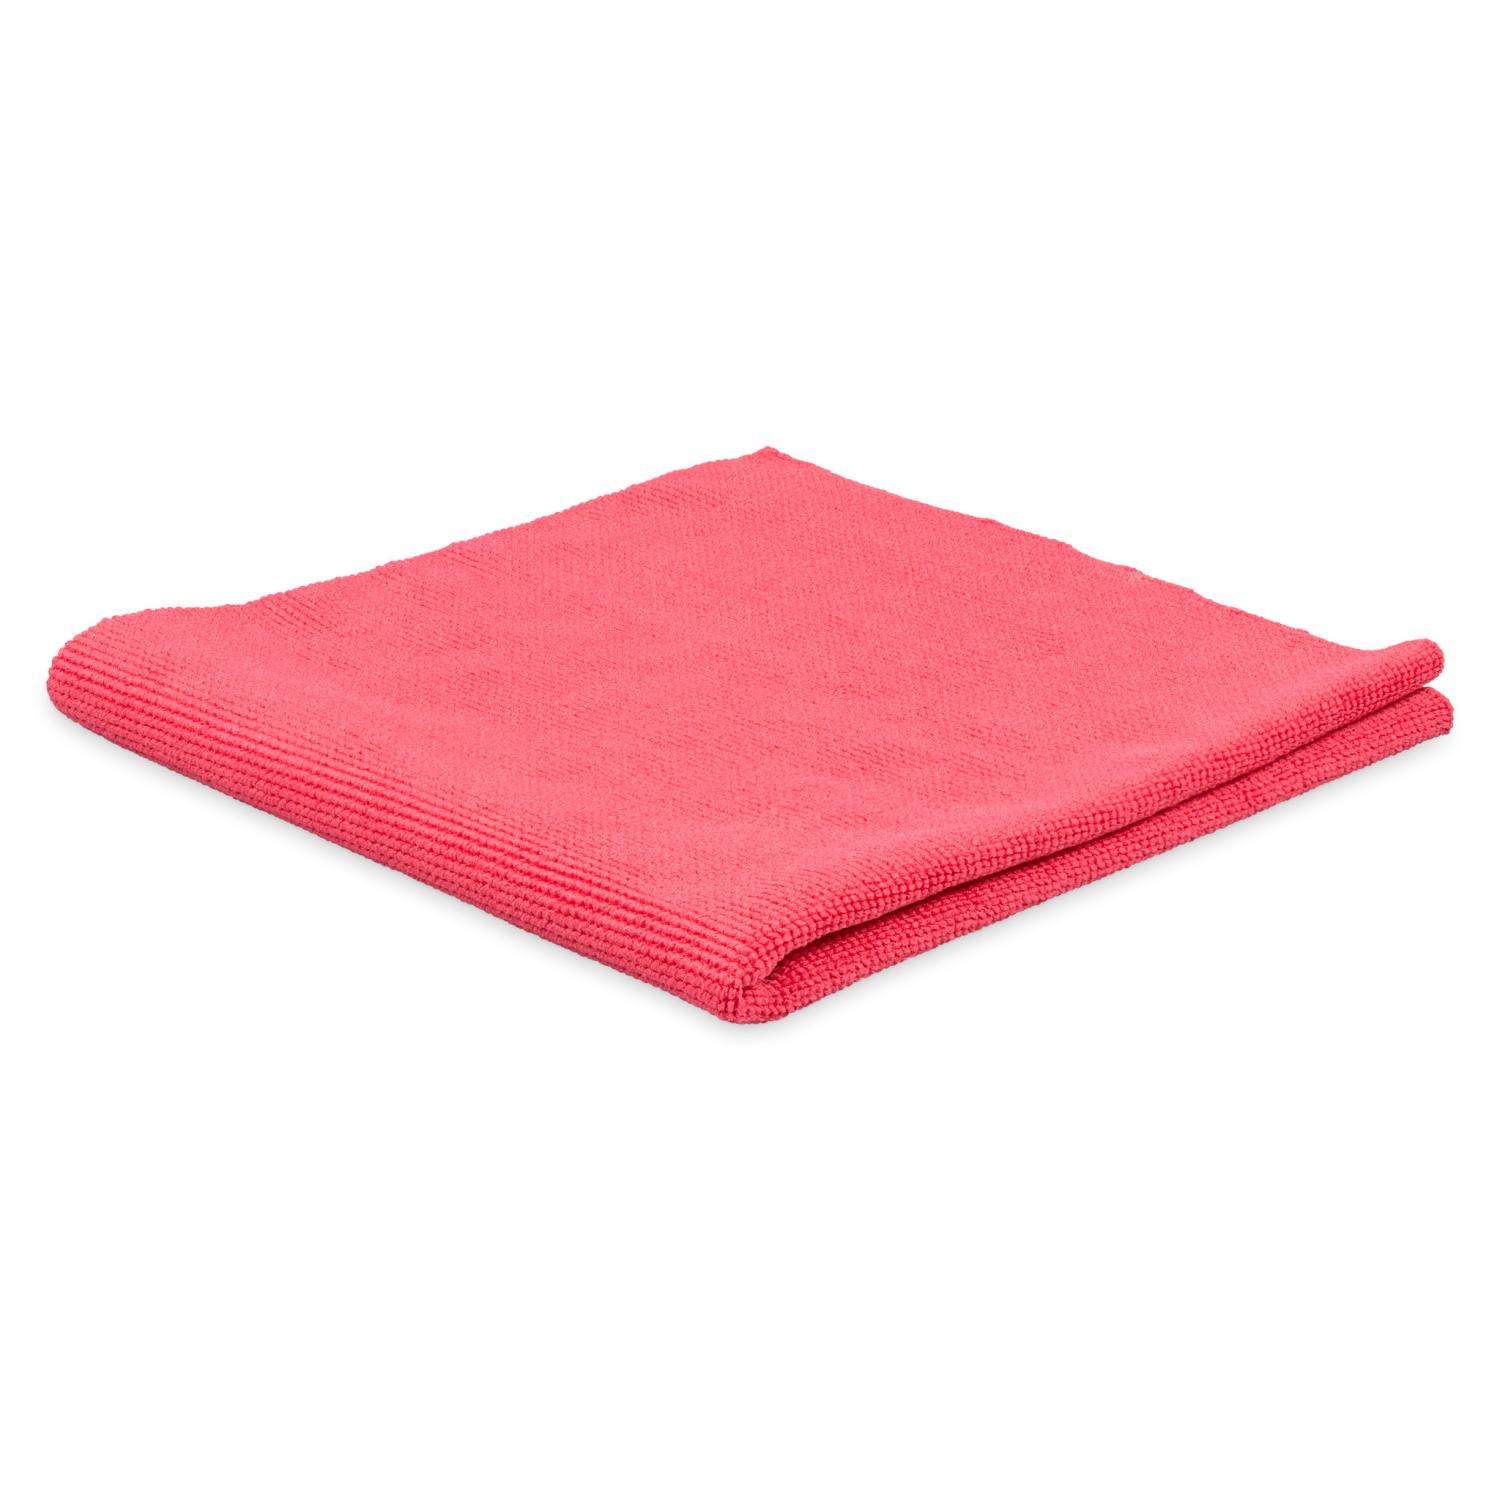 Seamless Microfibre Tricot Laser Red, 300gsm, 38x38 cm 5-Pack.